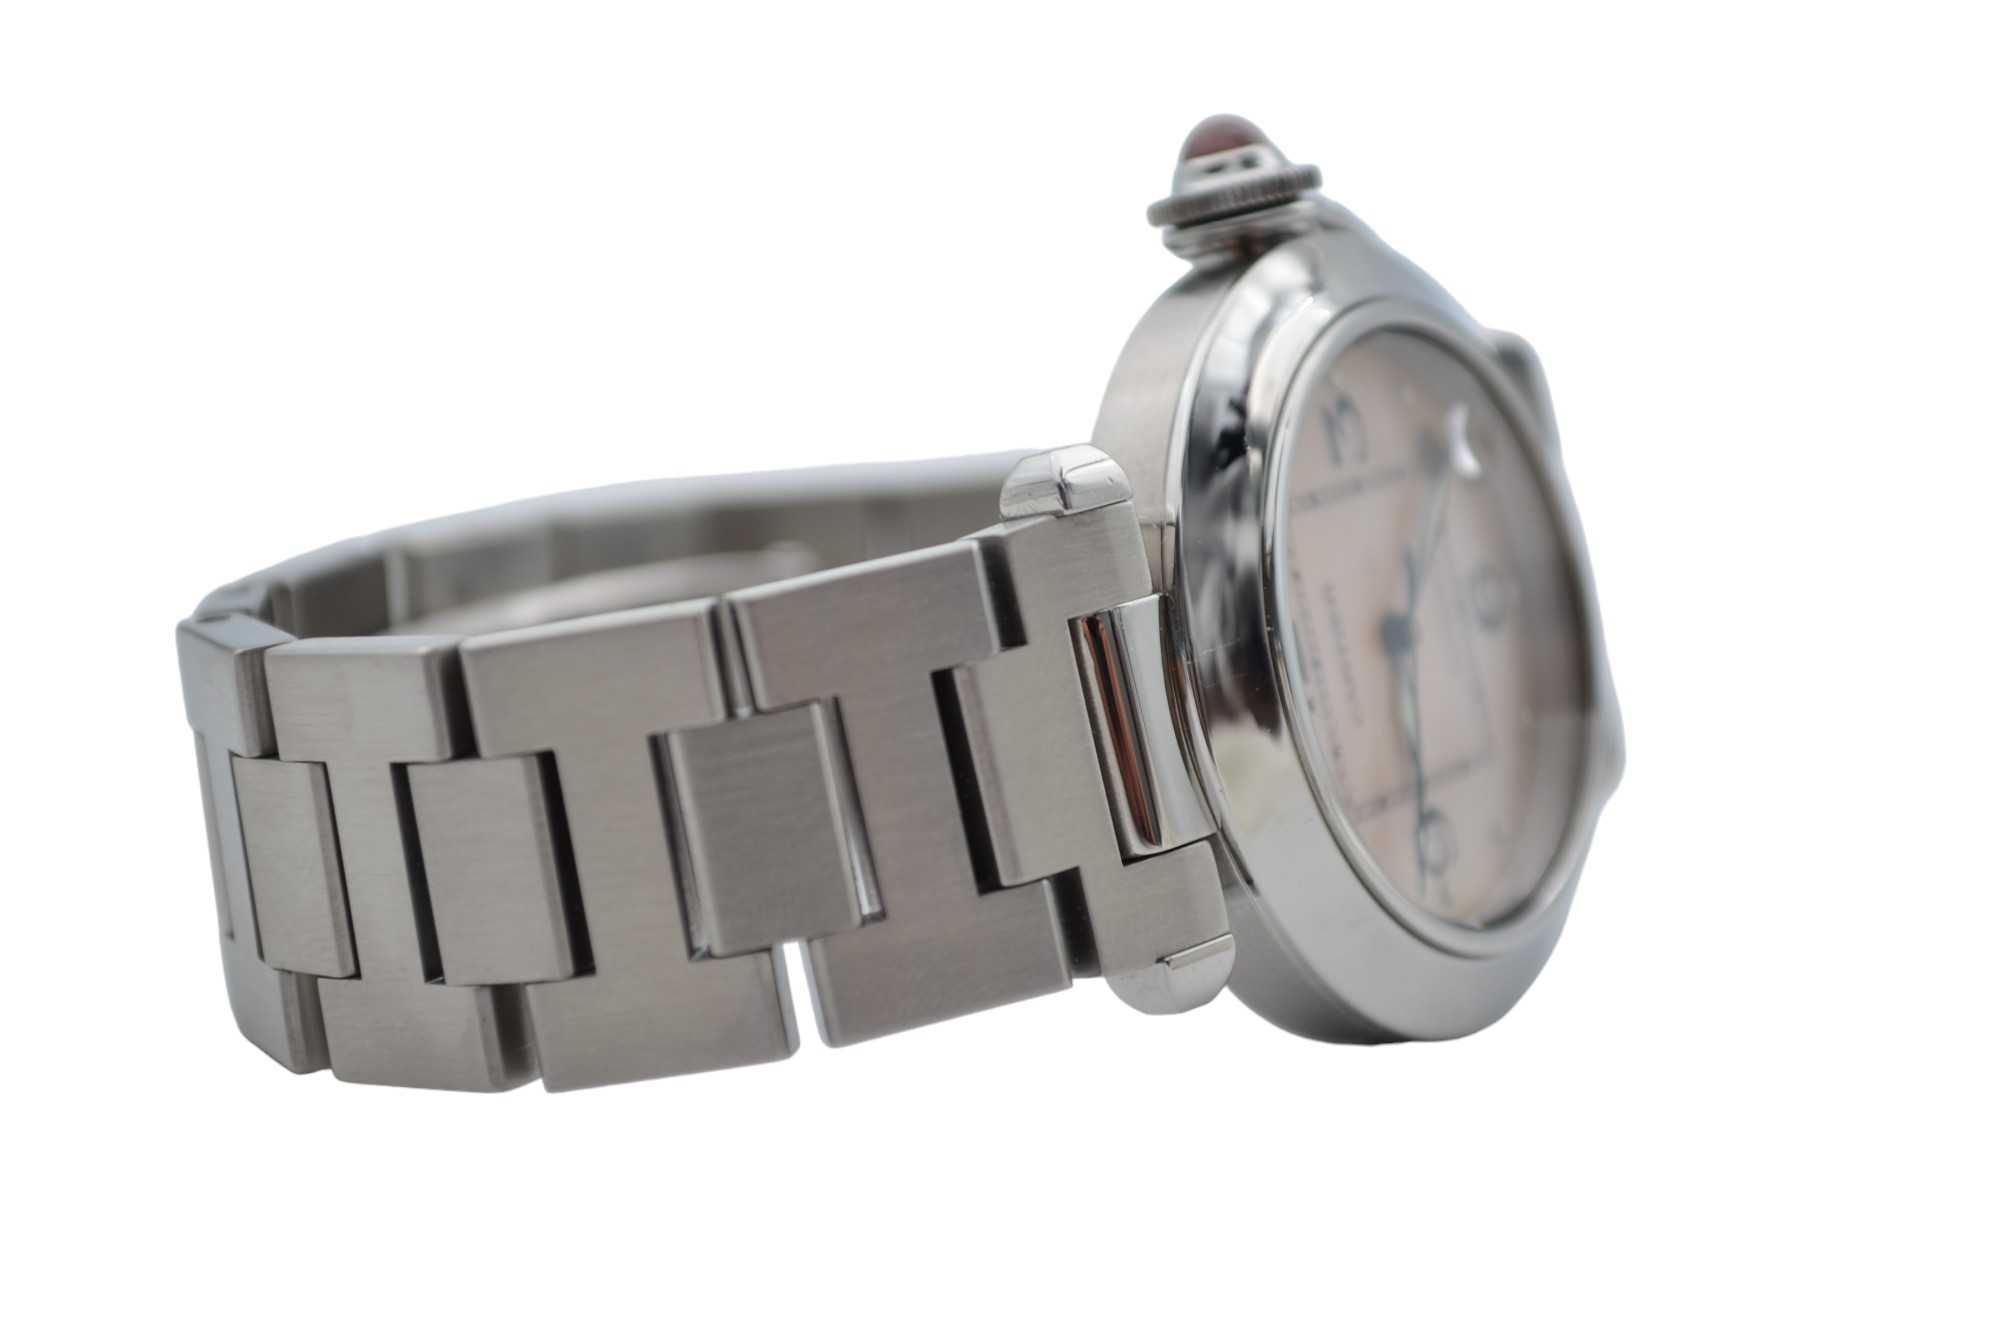 Cartier Pasha C 35mm Stainless Steel Mop Dial Automatic Ref: 2324